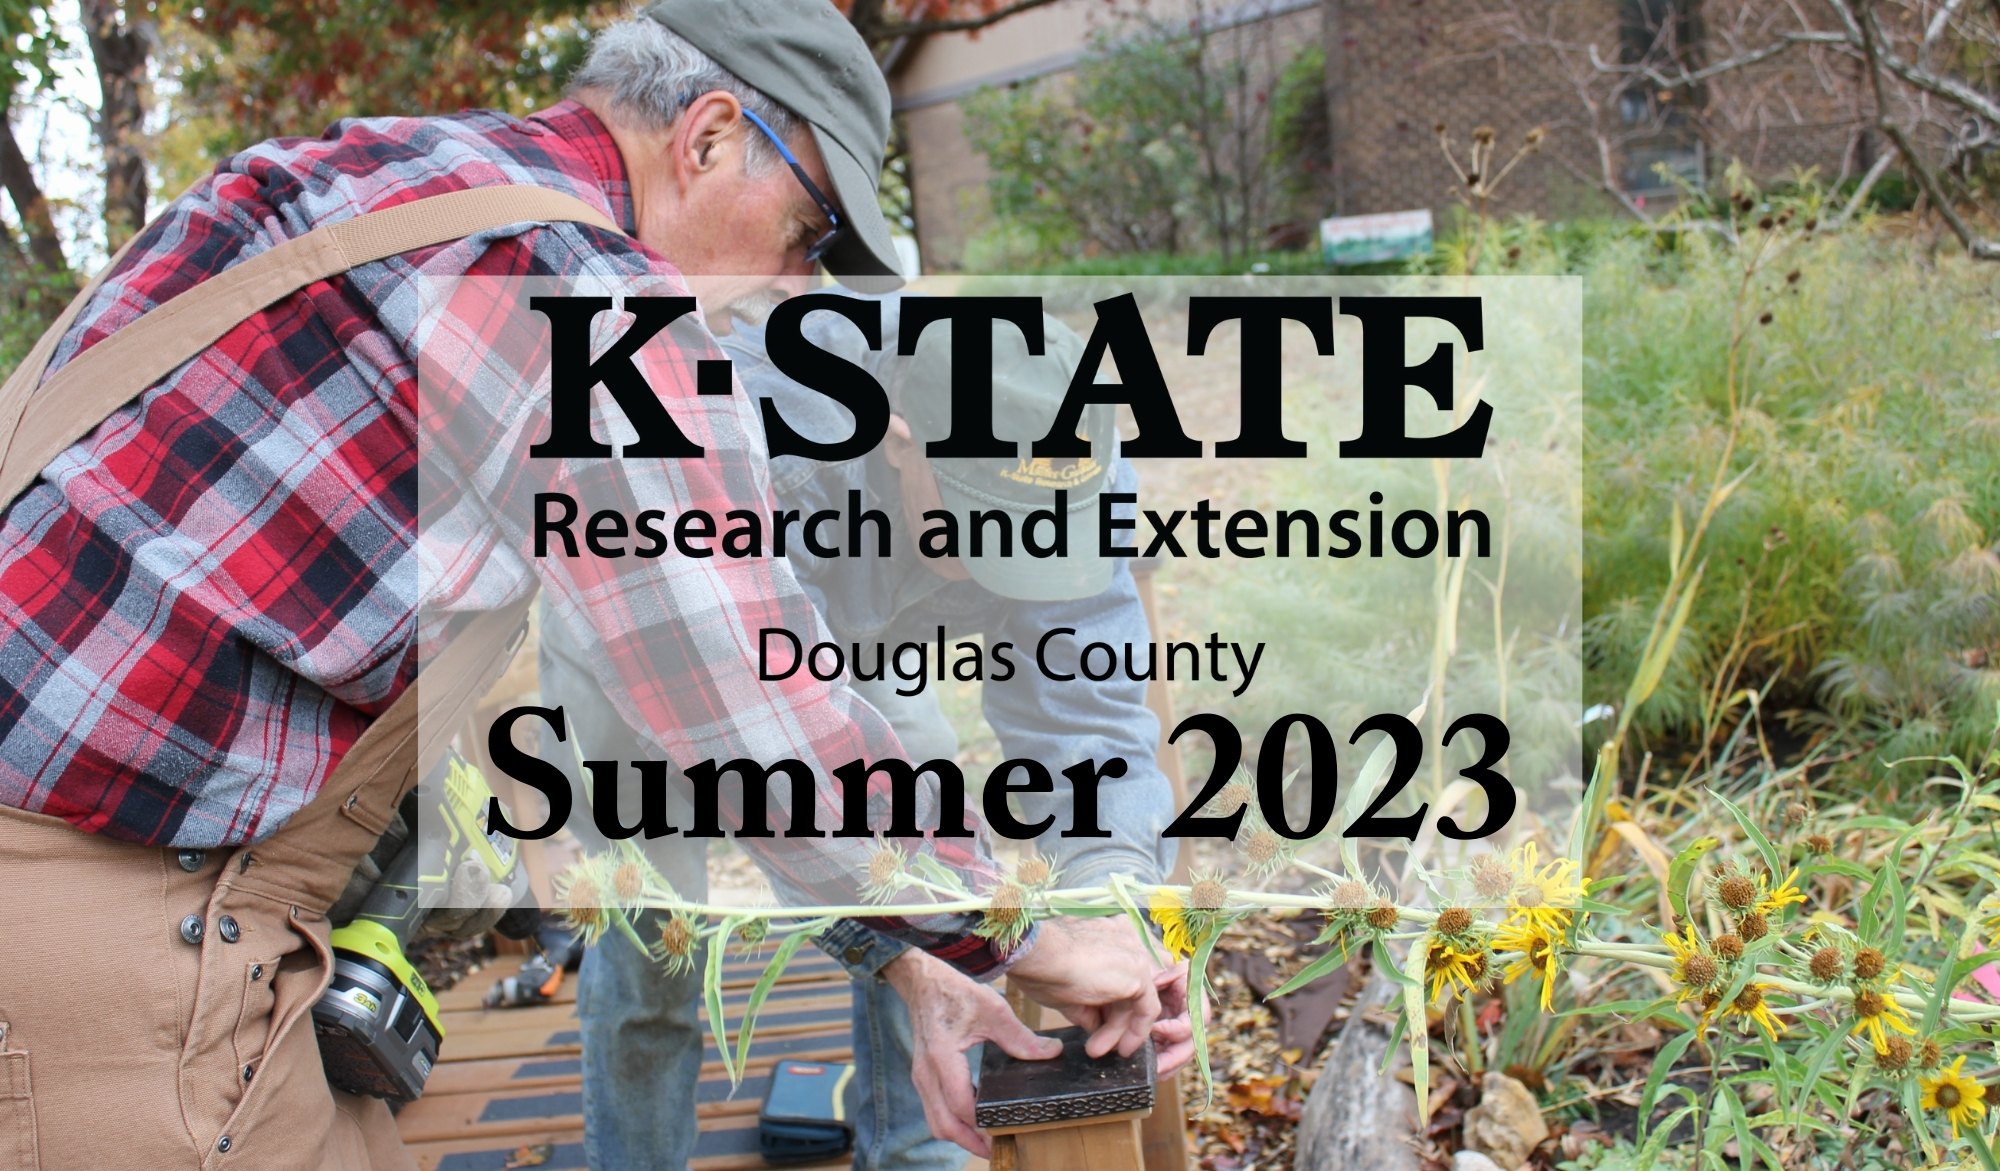 gardeners in the background fixing a garden bridge and a faded white square in the foreground with the text "K-State Research and Extension Douglas County Summer 2023 Newsletter"